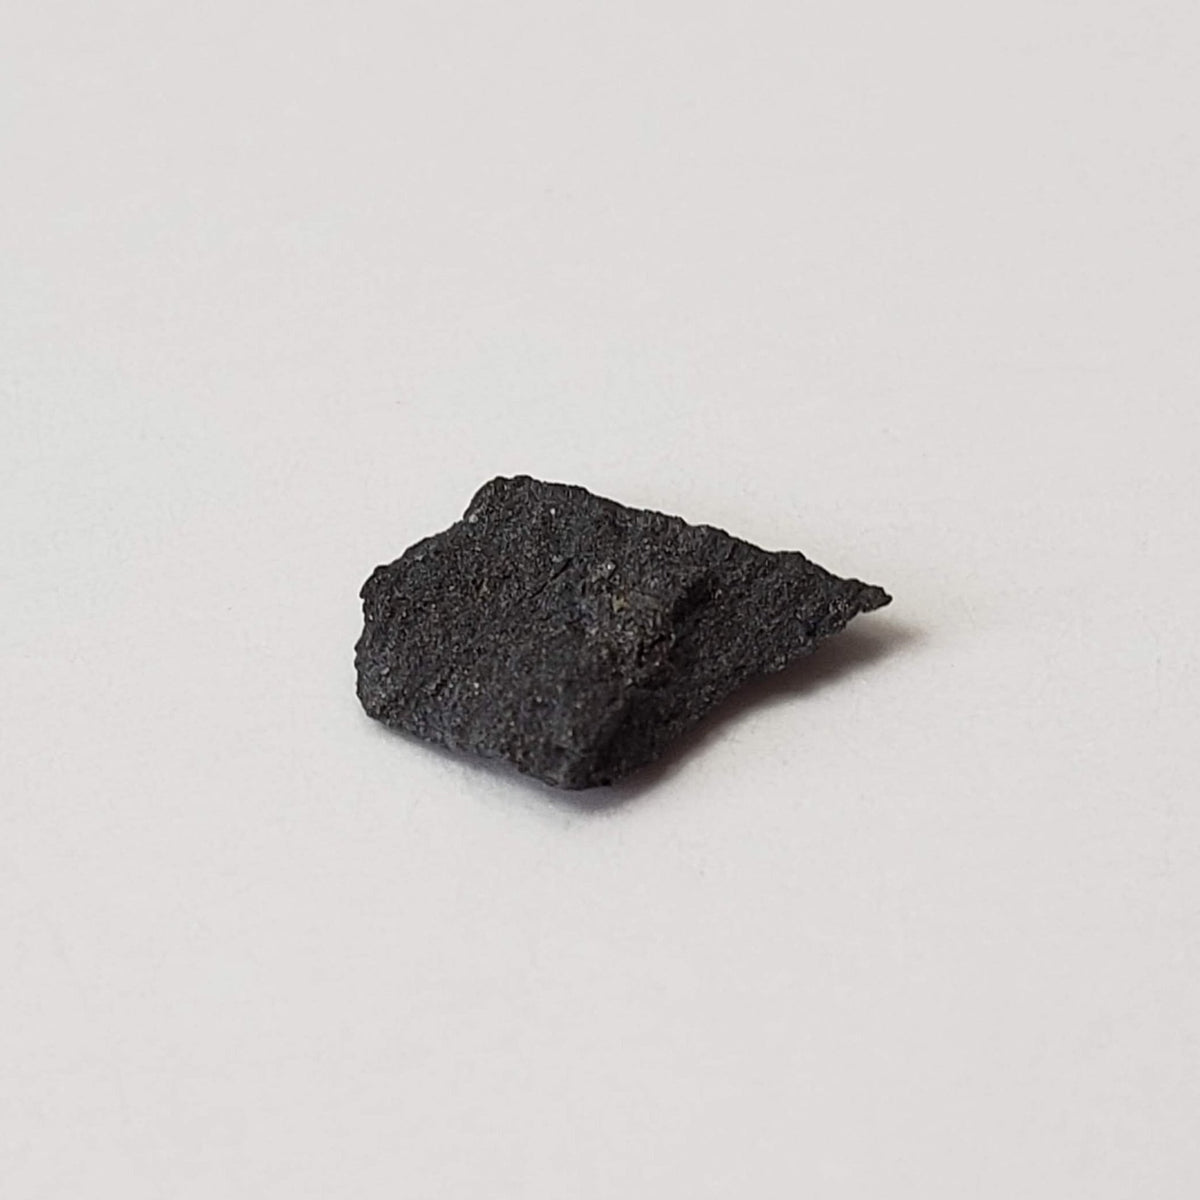 Abee Meteorite | 124 mg | Fragment | Rare Enstatite | EH4 Class | Observed Fall 1952 Canada